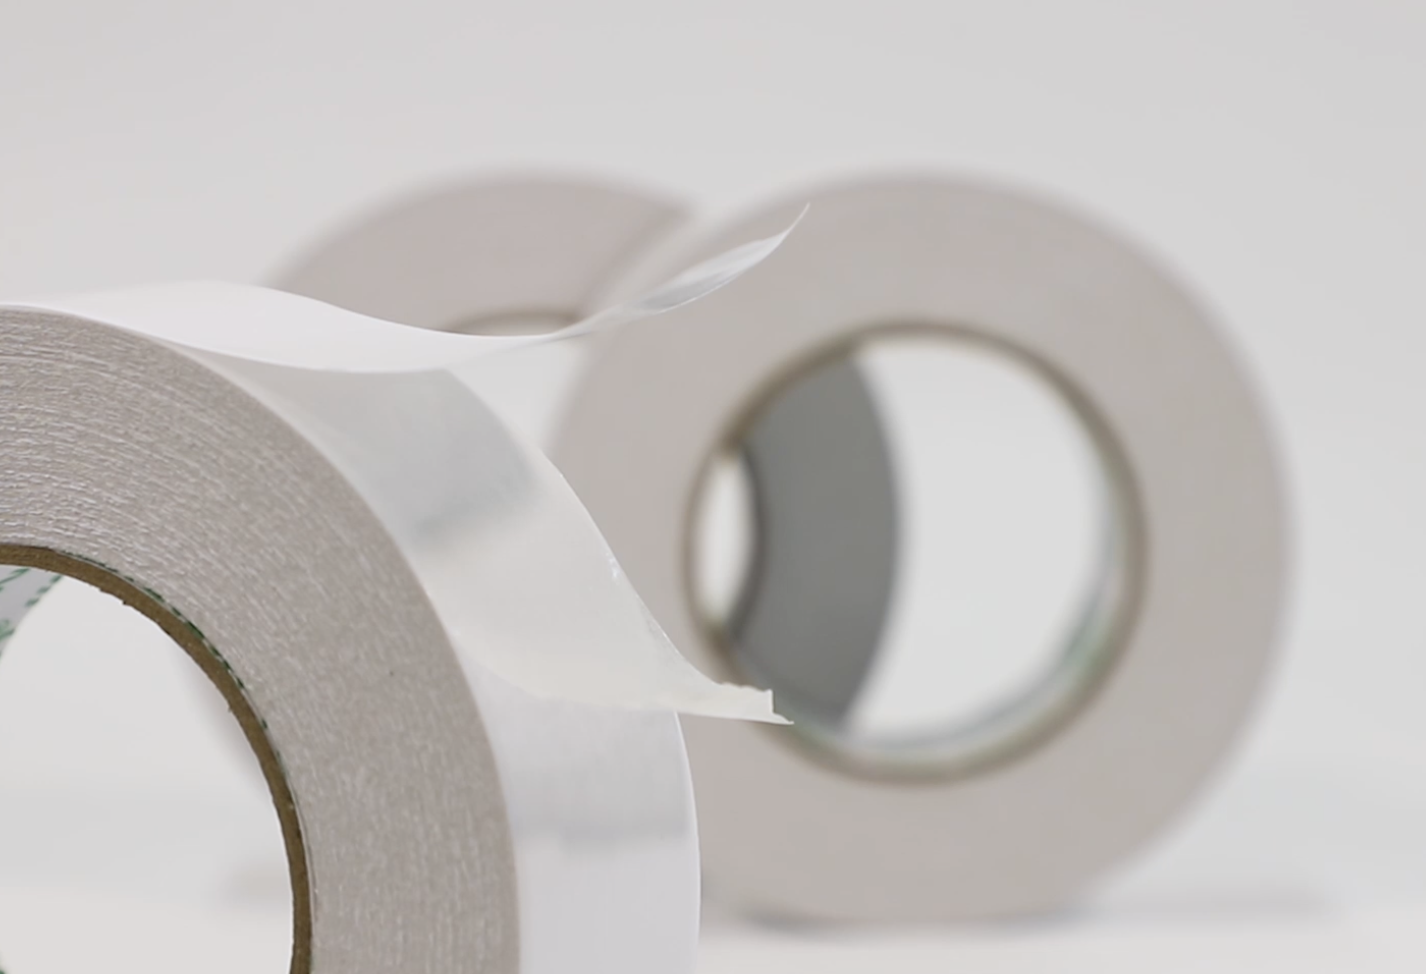 What is double-sided tape used on?